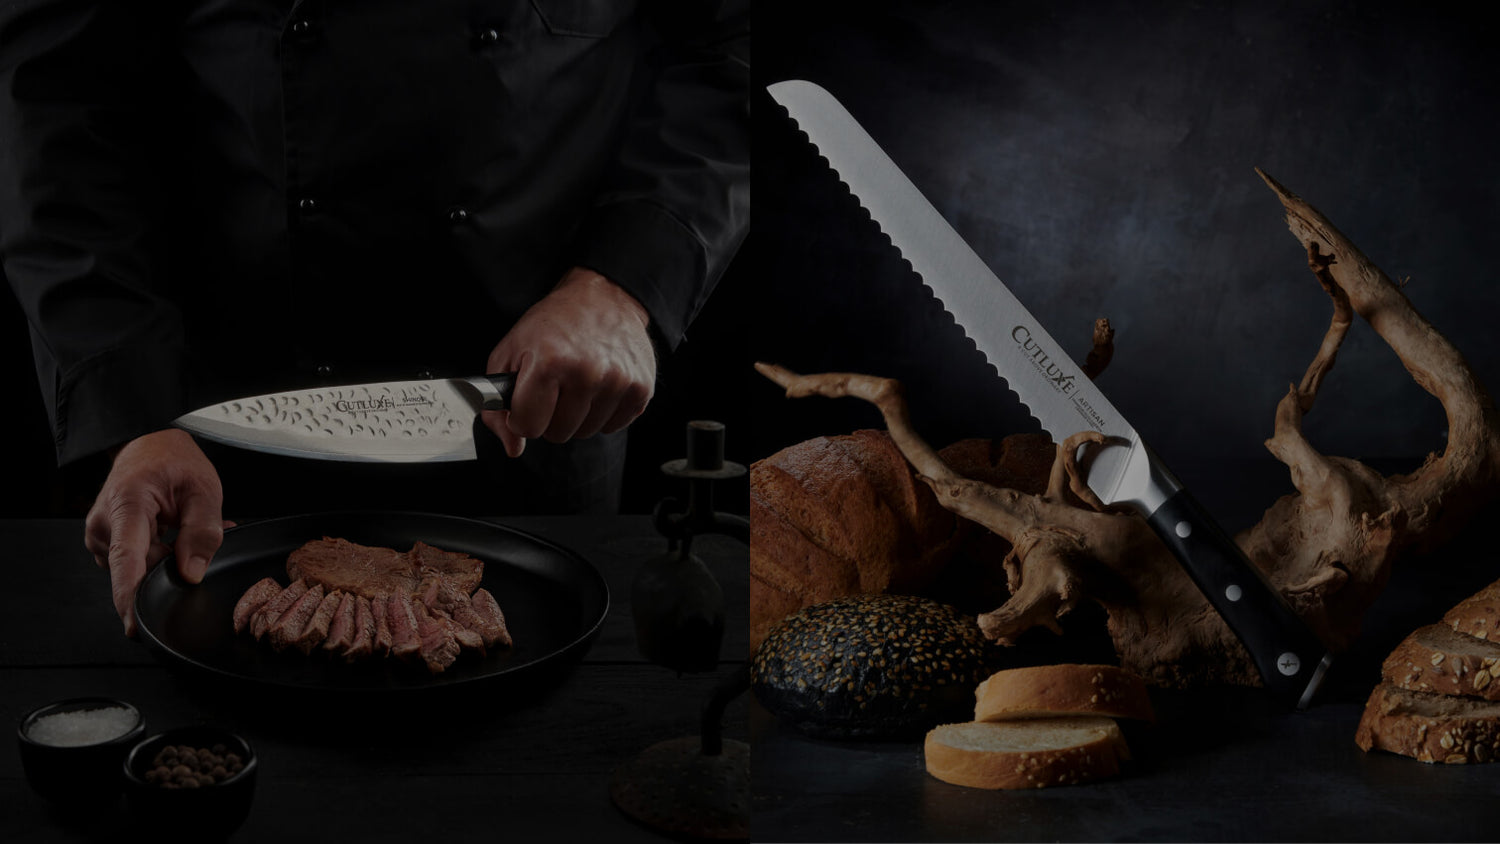 Cutluxe Crafts Exceptional Knives at an Affordable Price - Food & Beverage  Magazine